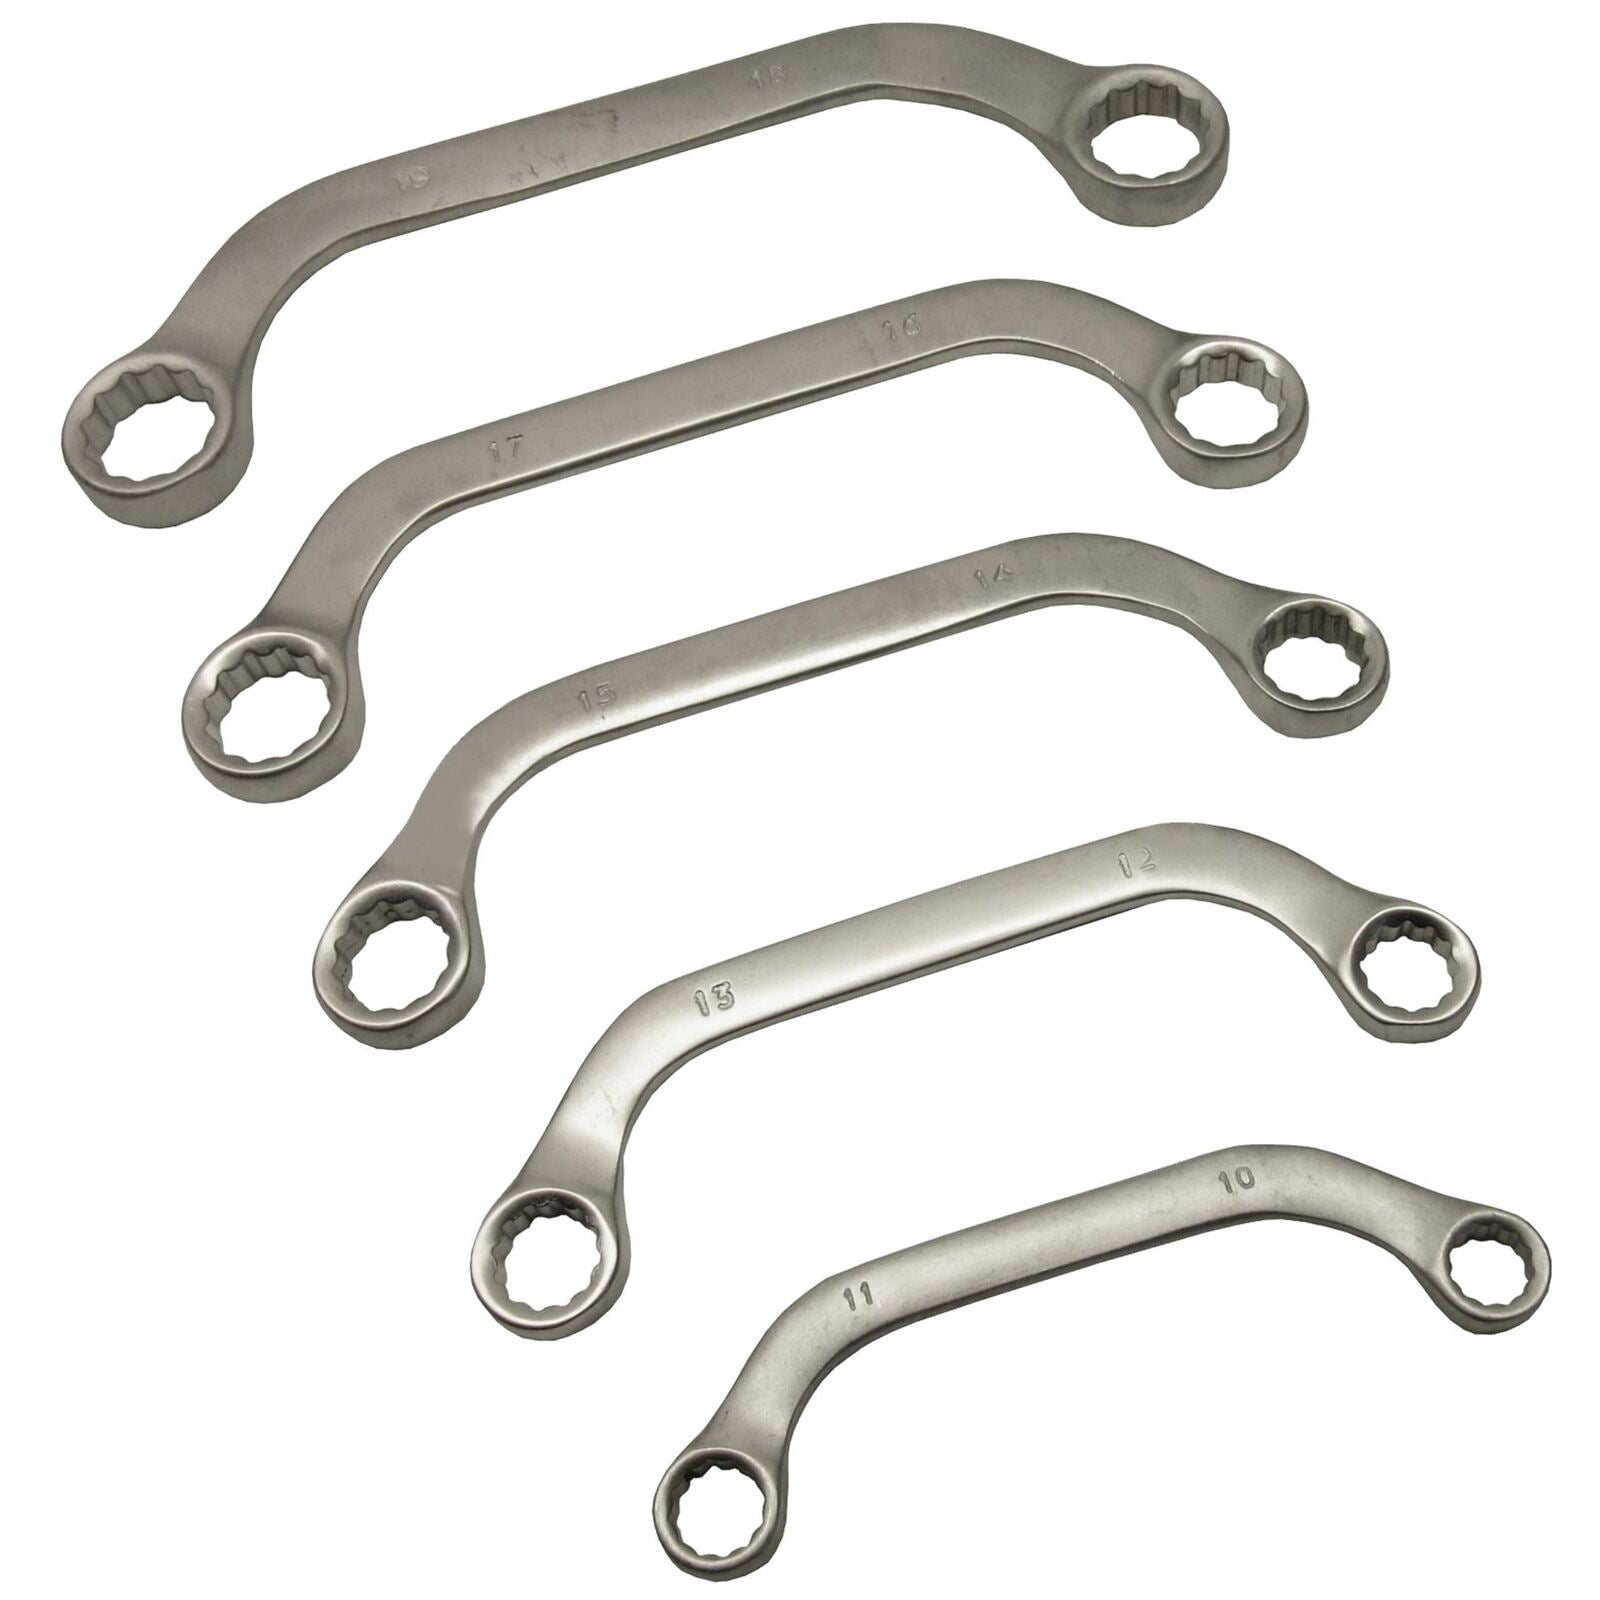 Half Moon Ring C Obstruction Spanners Wrenches 5pc 10 Sizes 10 - 19mm